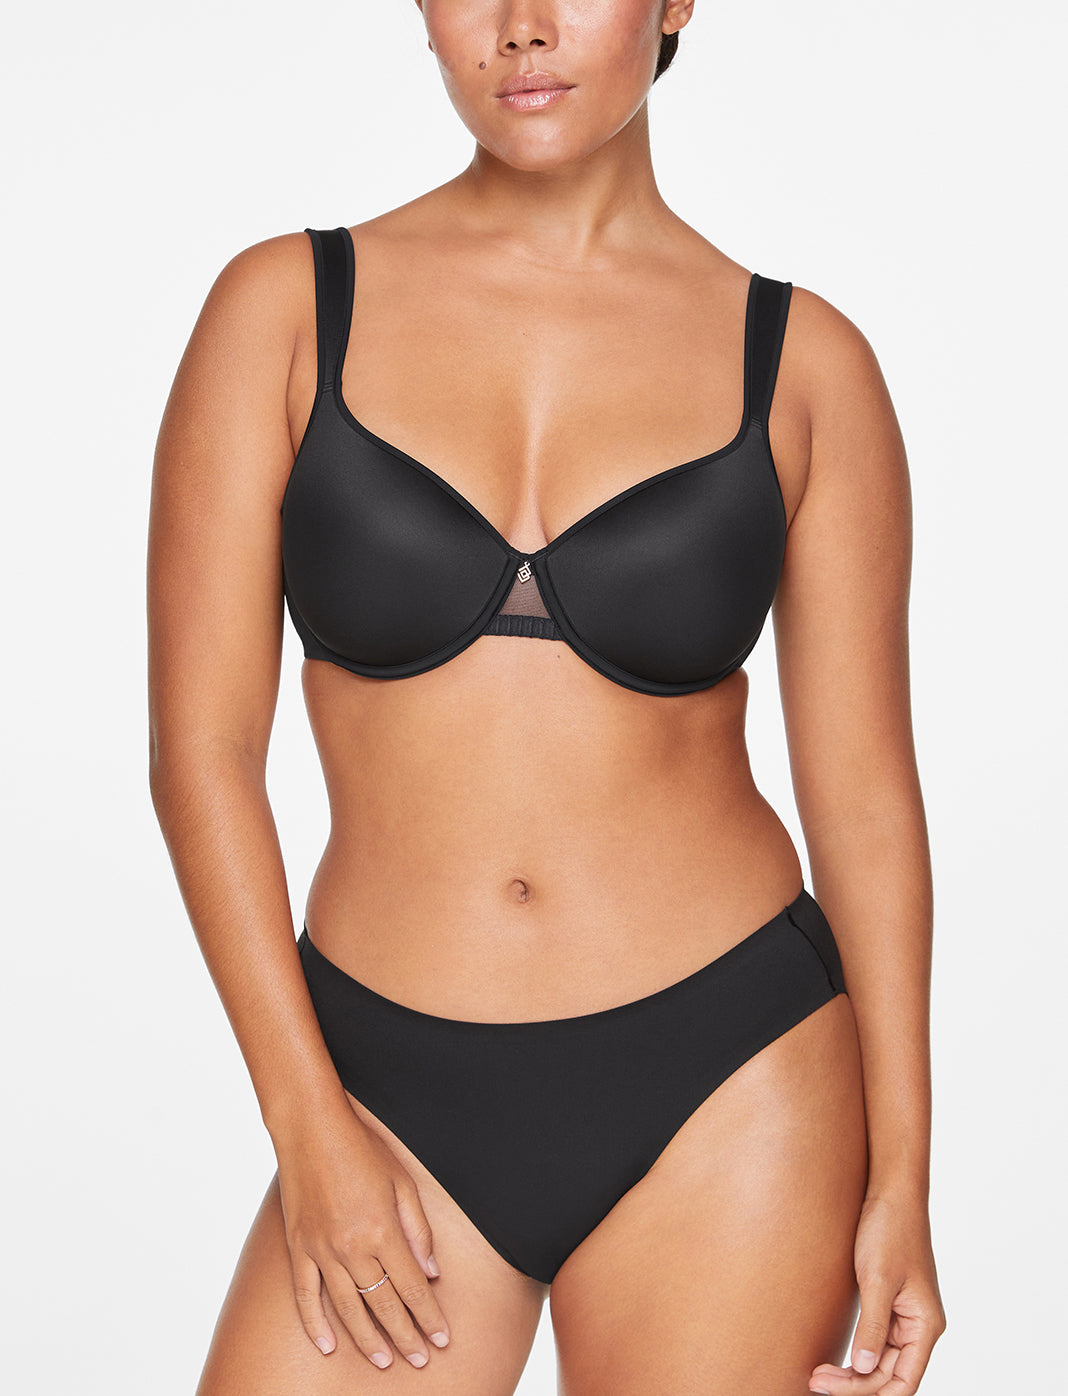 The bra that everyone needs in their wardrobe. Shop @Thirdlove 24/7®  Classic Uplift Plunge Bra today!